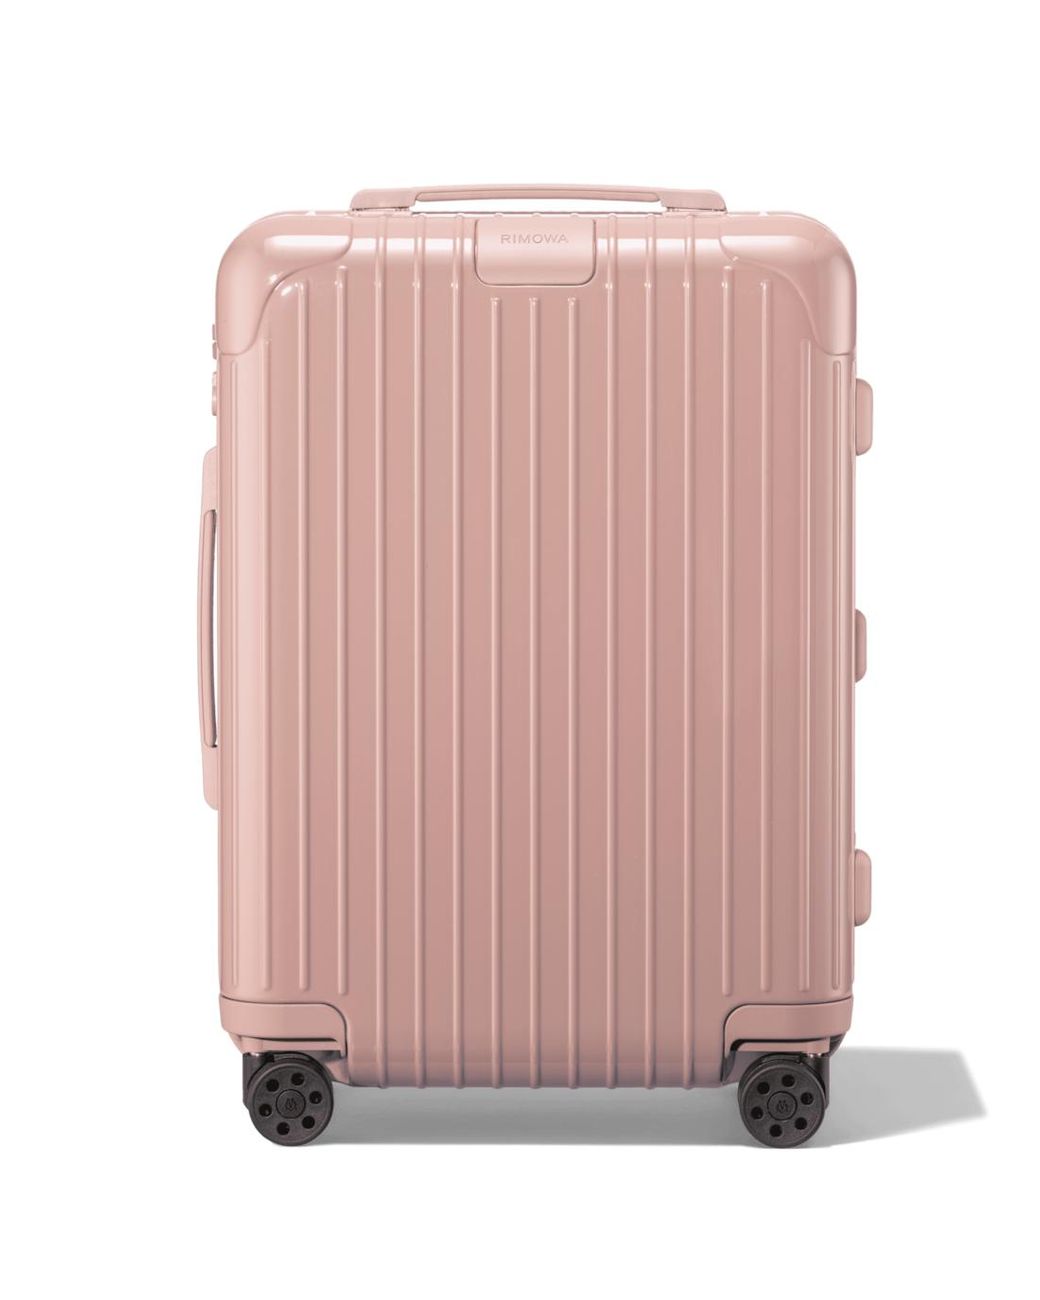 Rimowa luggage has two new chic colorways available for summer: Meet  'Petal' and 'Cedar' - CBS News